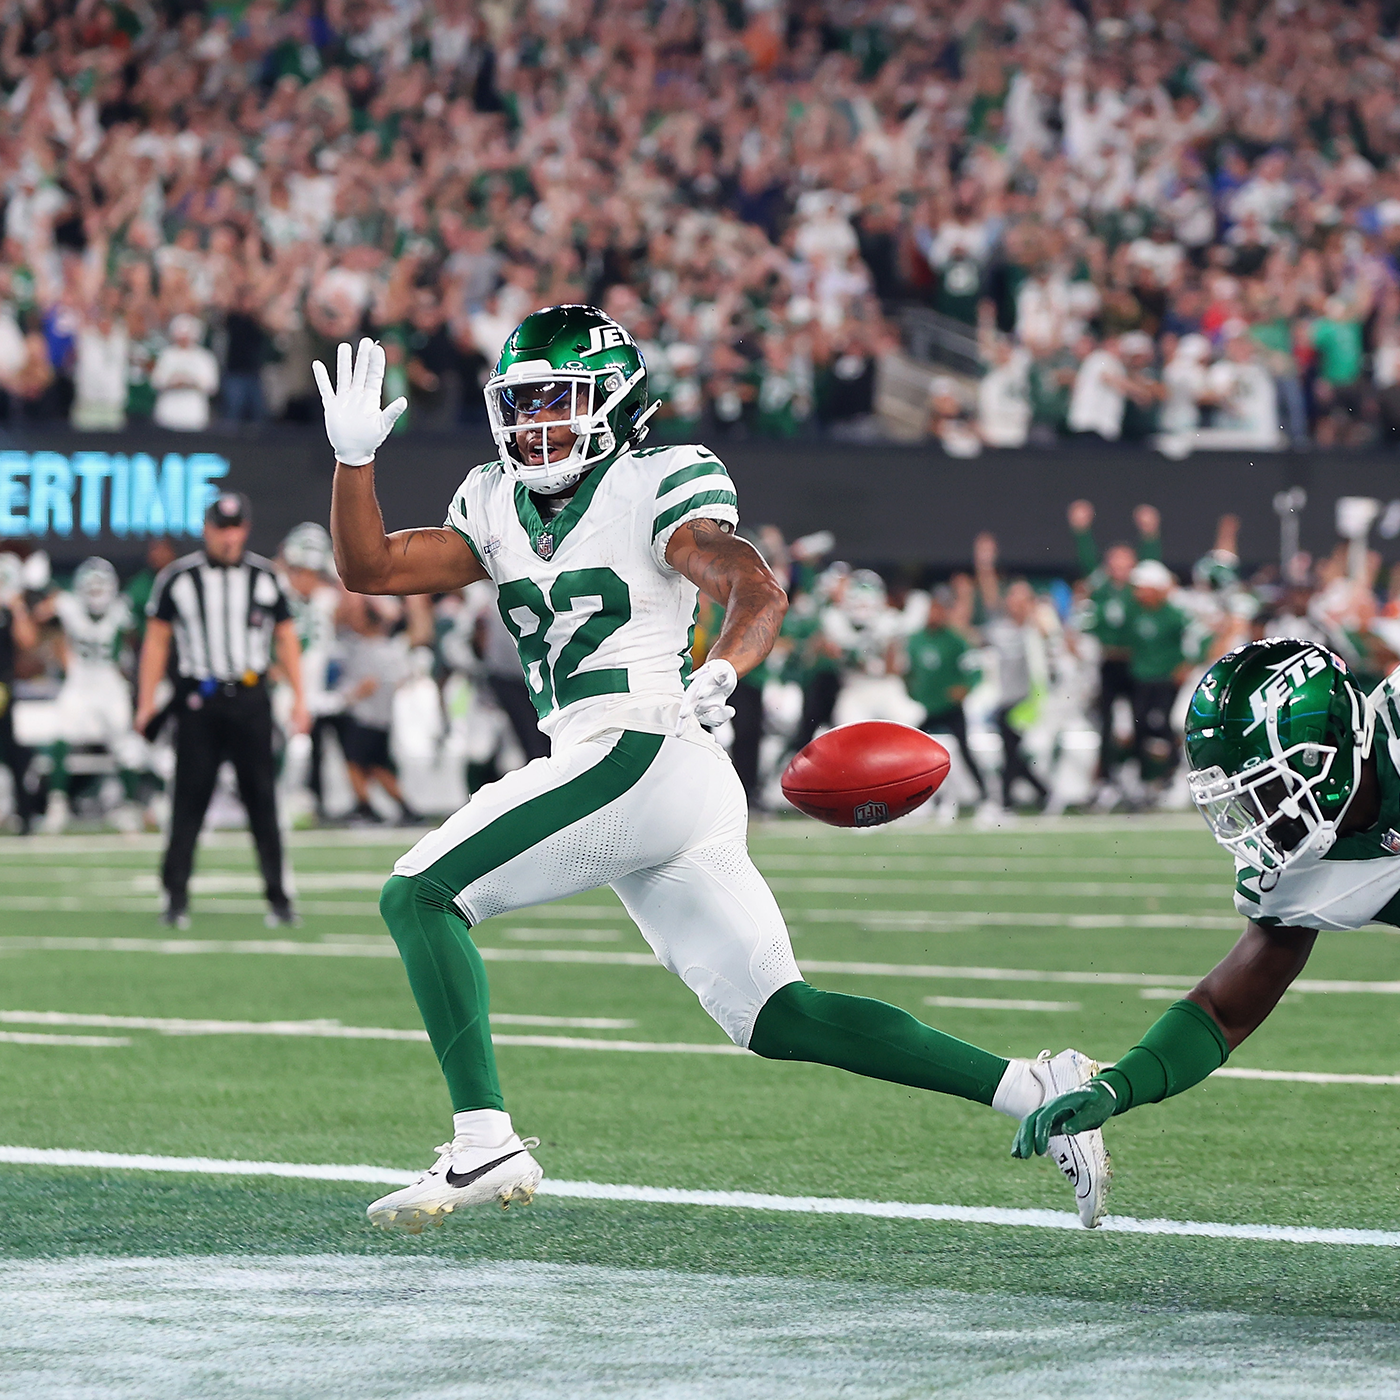 NYJ OT 22-16 Rookie Xavier Gipson ends game with 65-yard punt return TD